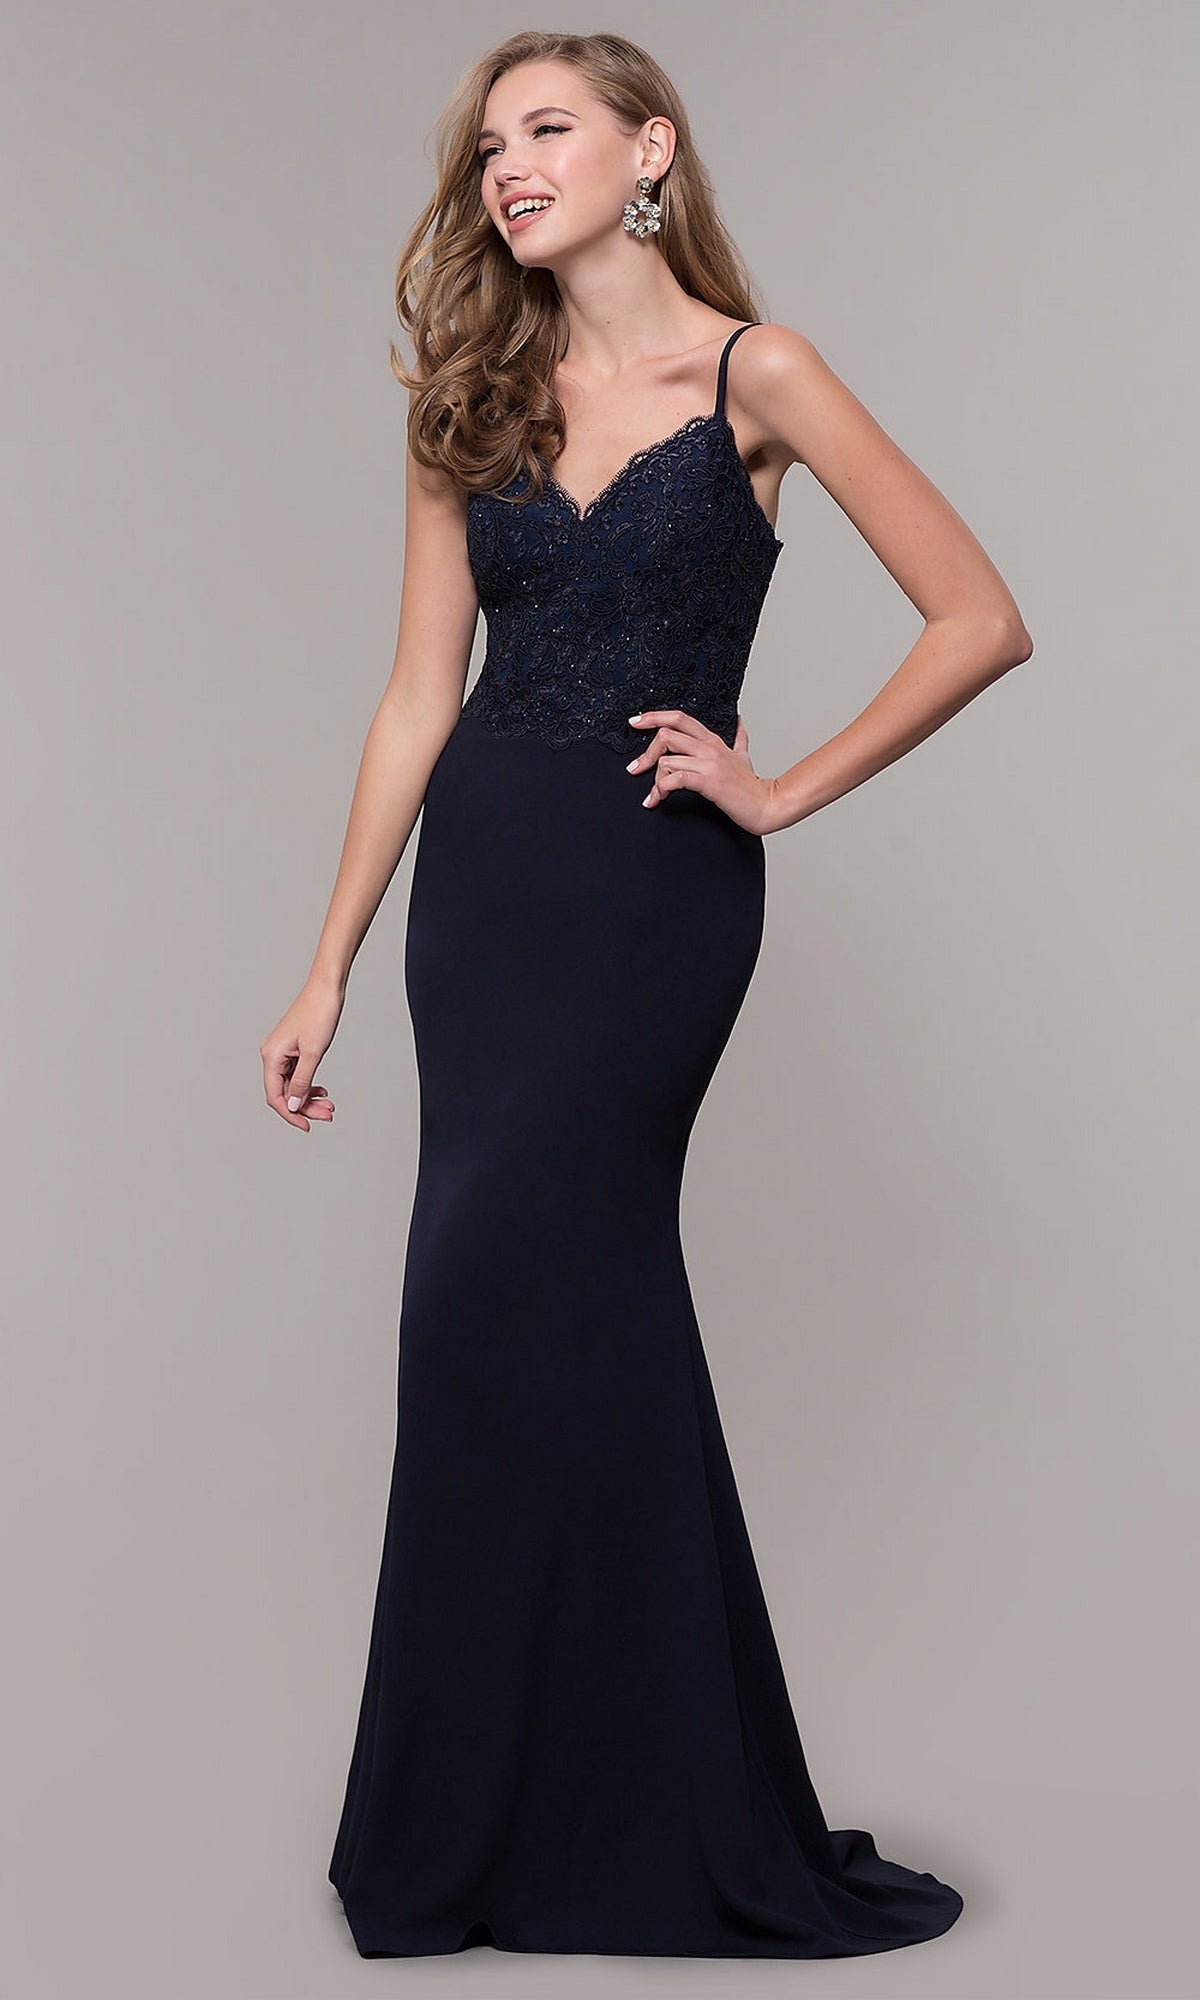 Navy Sheath Formal Evening Dress with Lace Bodice